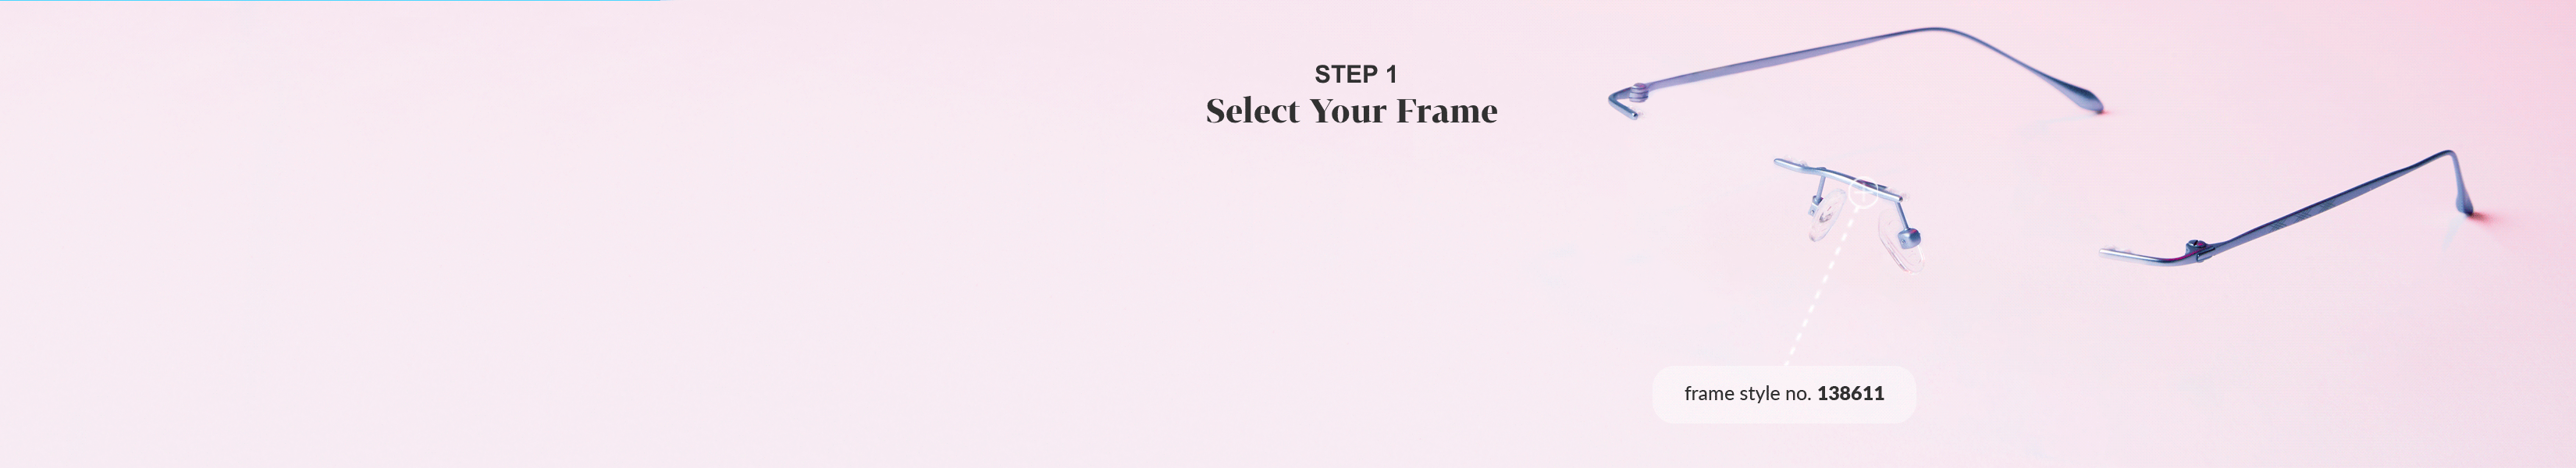 Animated gif of Zenni rimless glasses being put together, with captions saying 'select your frame,' 'choose your lens shape,' and 'customize your lens' against a pink background.